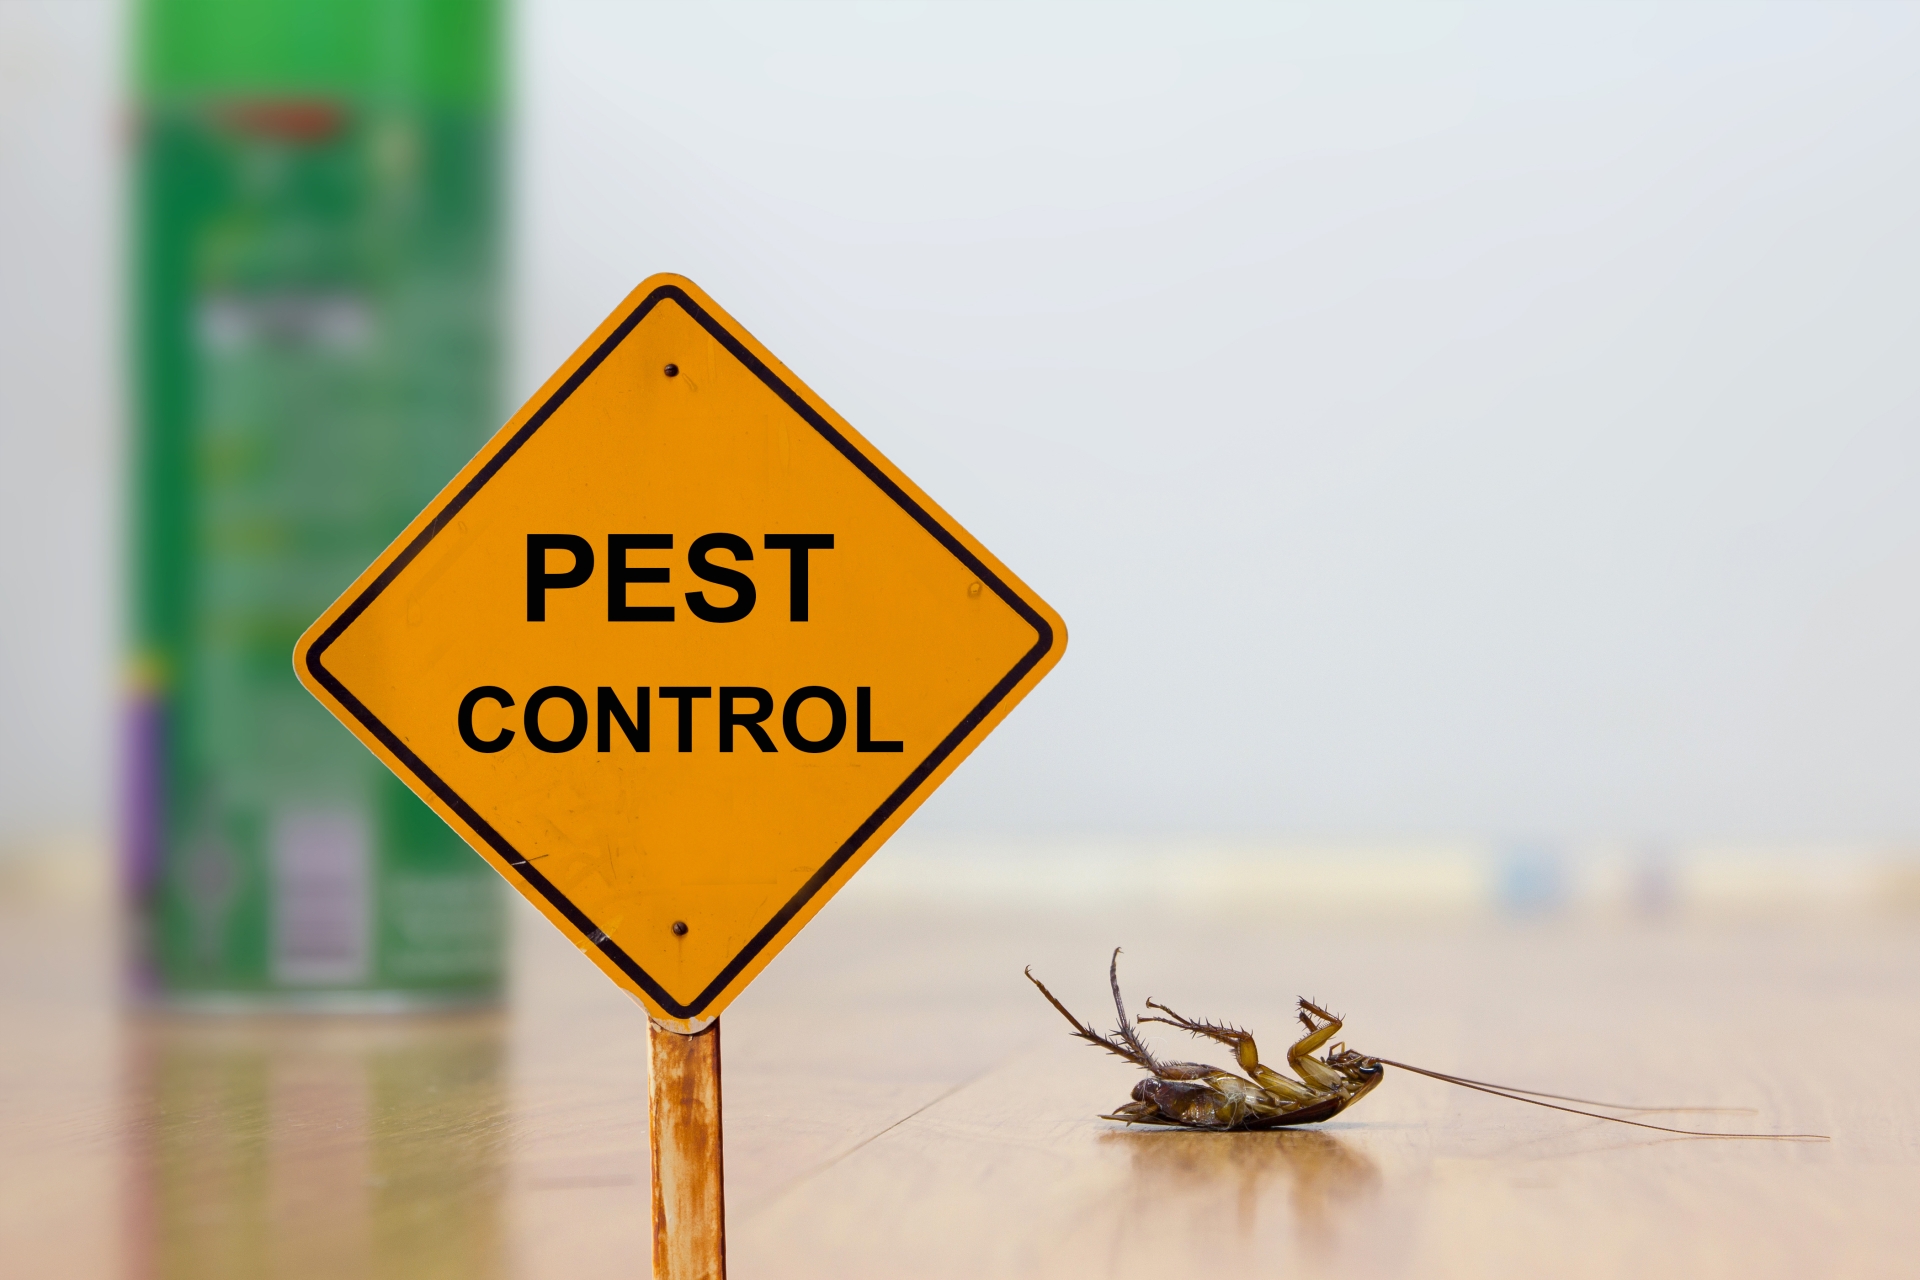 24 Hour Pest Control, Pest Control in Aldgate, Monument, Tower Hill, EC3. Call Now 020 8166 9746